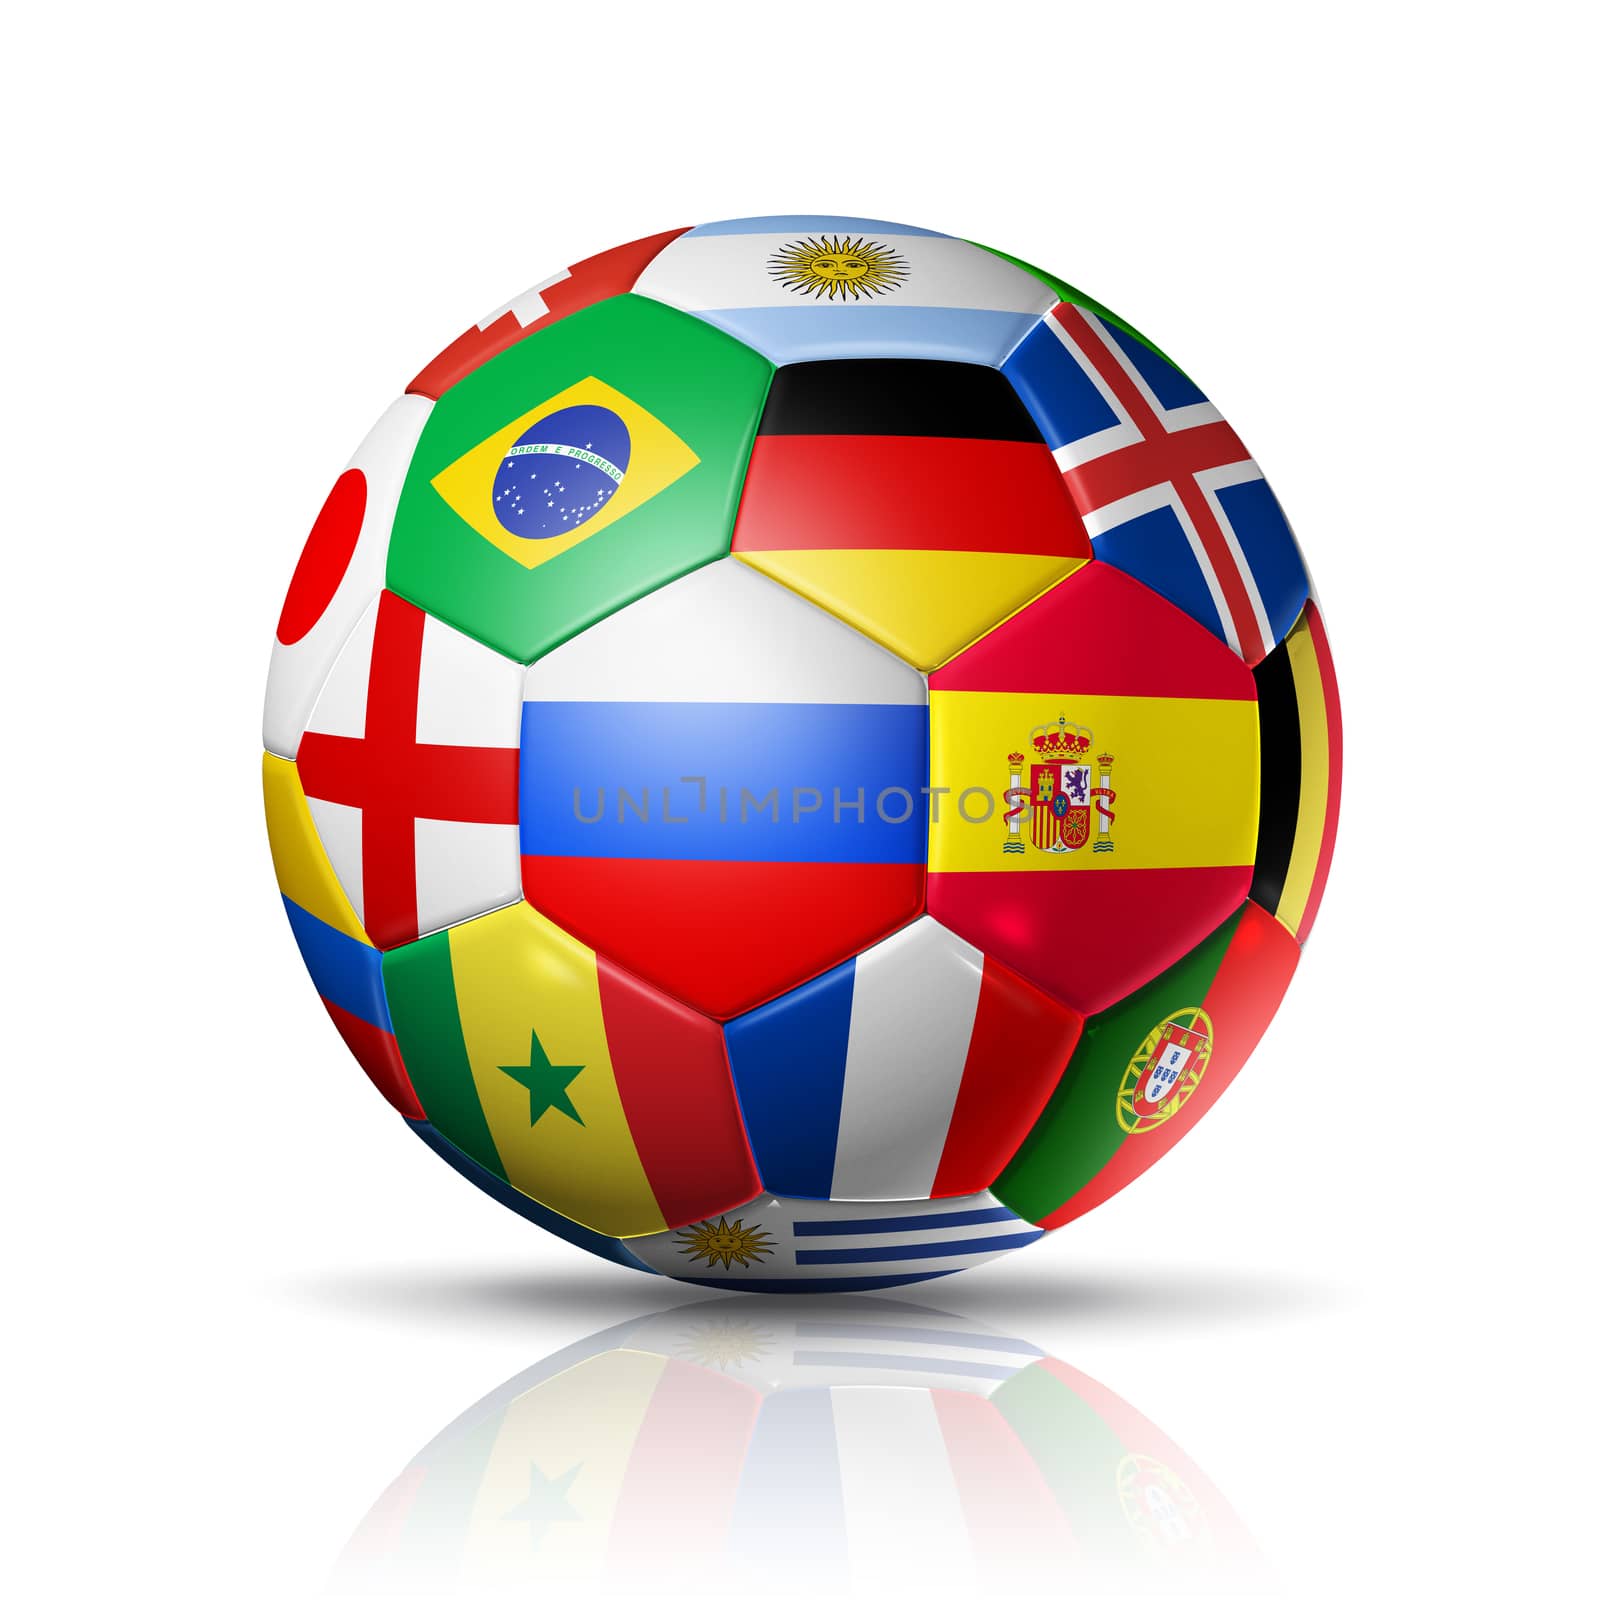 3D football soccer ball with team national flags. Russia 2018. Isolated on white